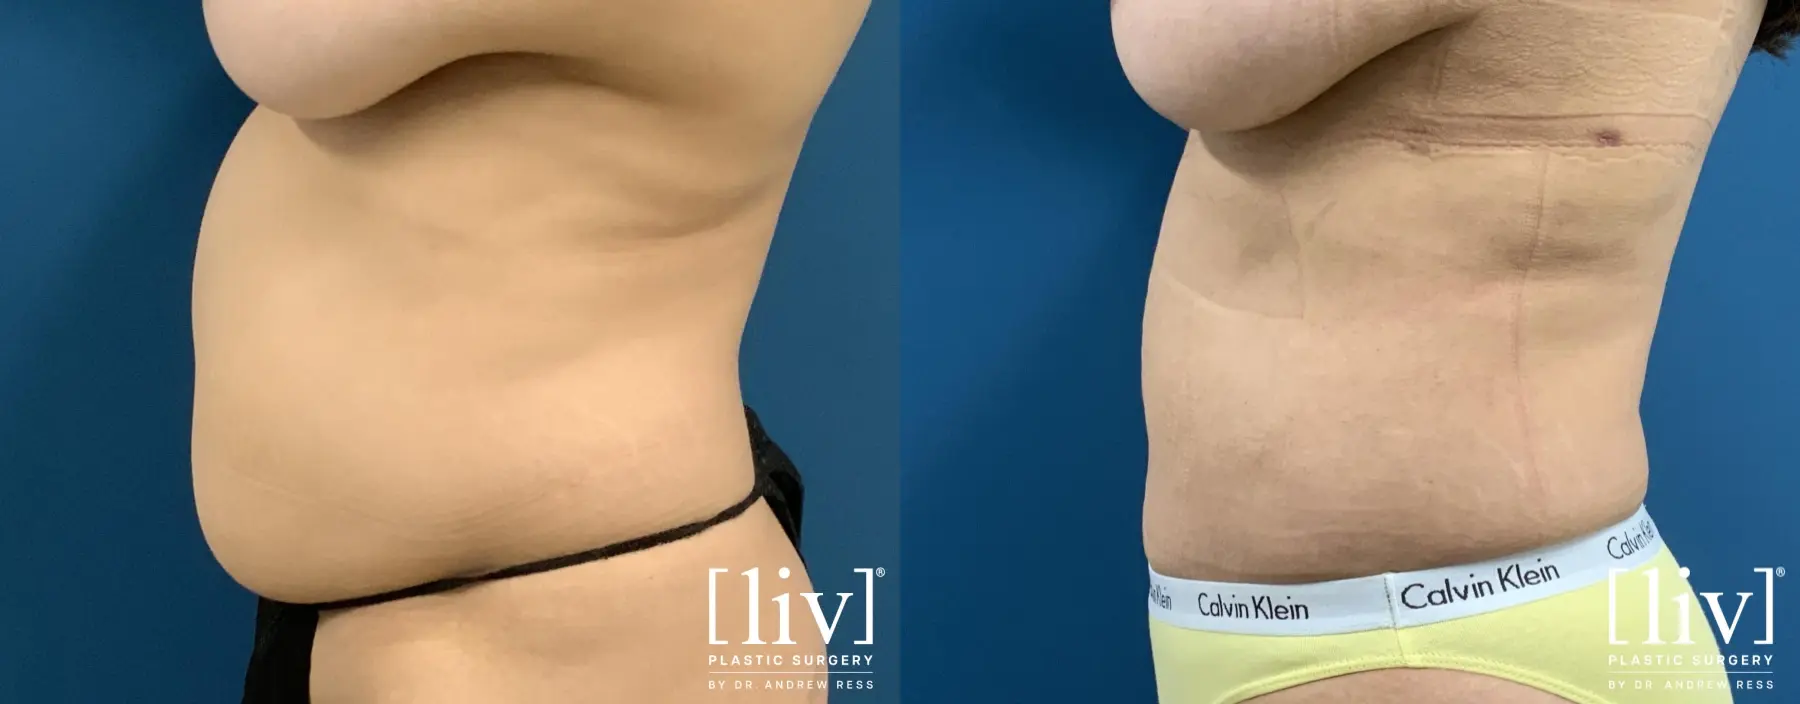 Liposuction: Patient 43 - Before and After 1